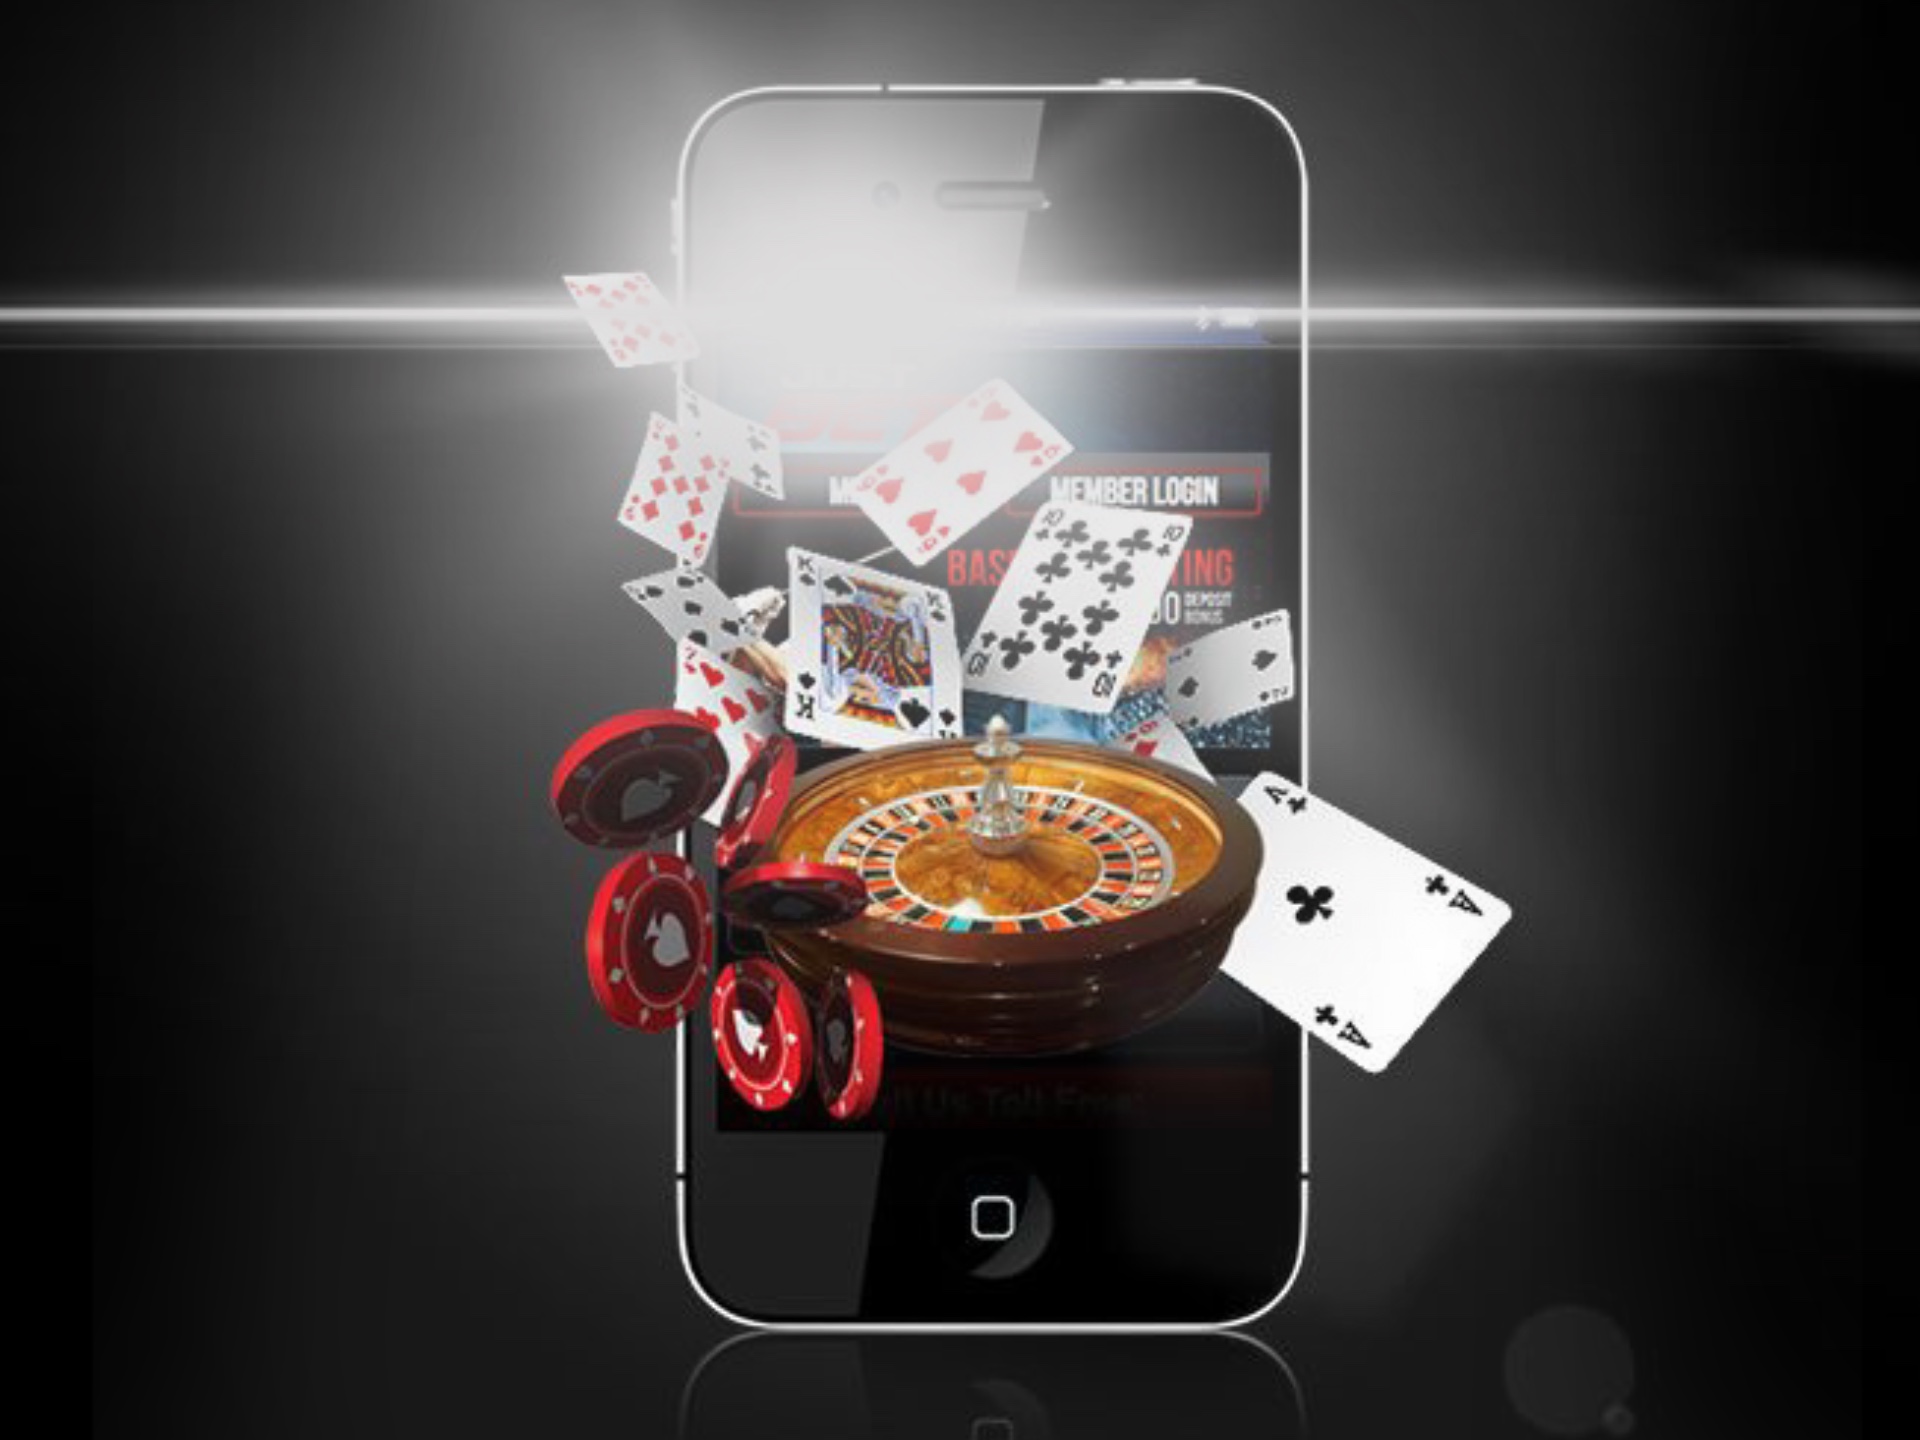 Download a mobile casino app from App Store or an official website and play casino games.